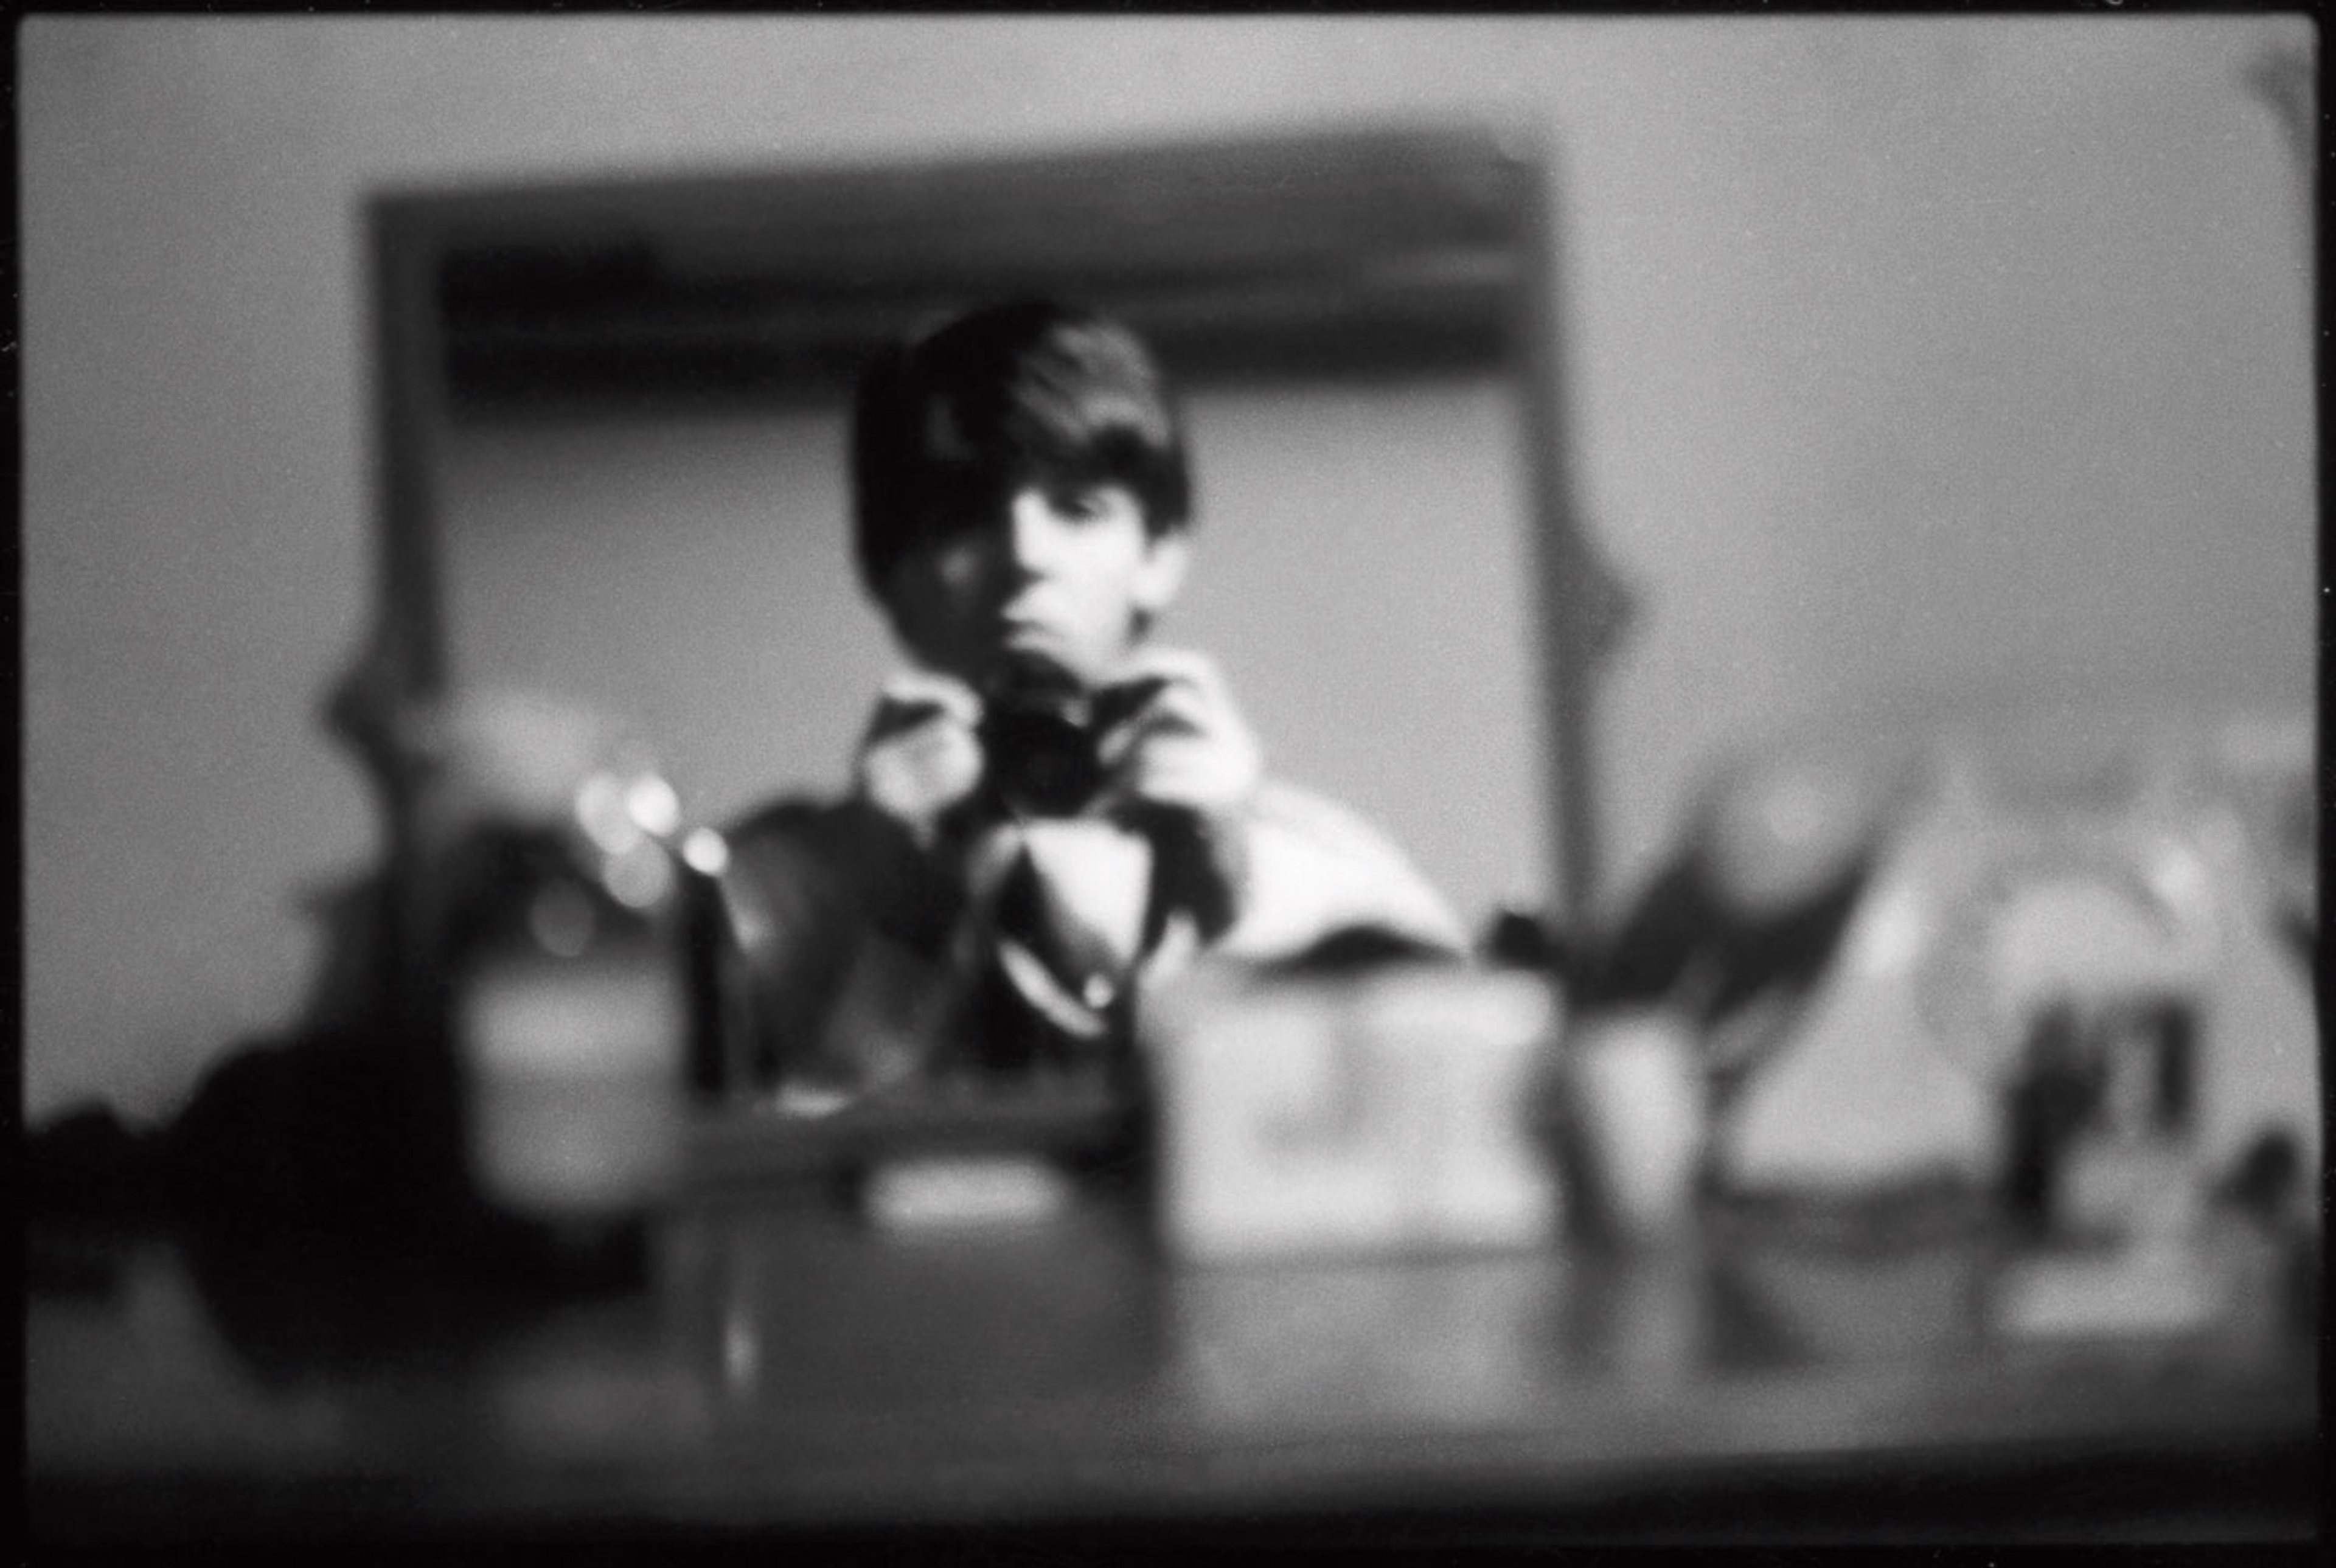 Black and white self-portrait photograph of Paul McCartney in London taken in the early sixties